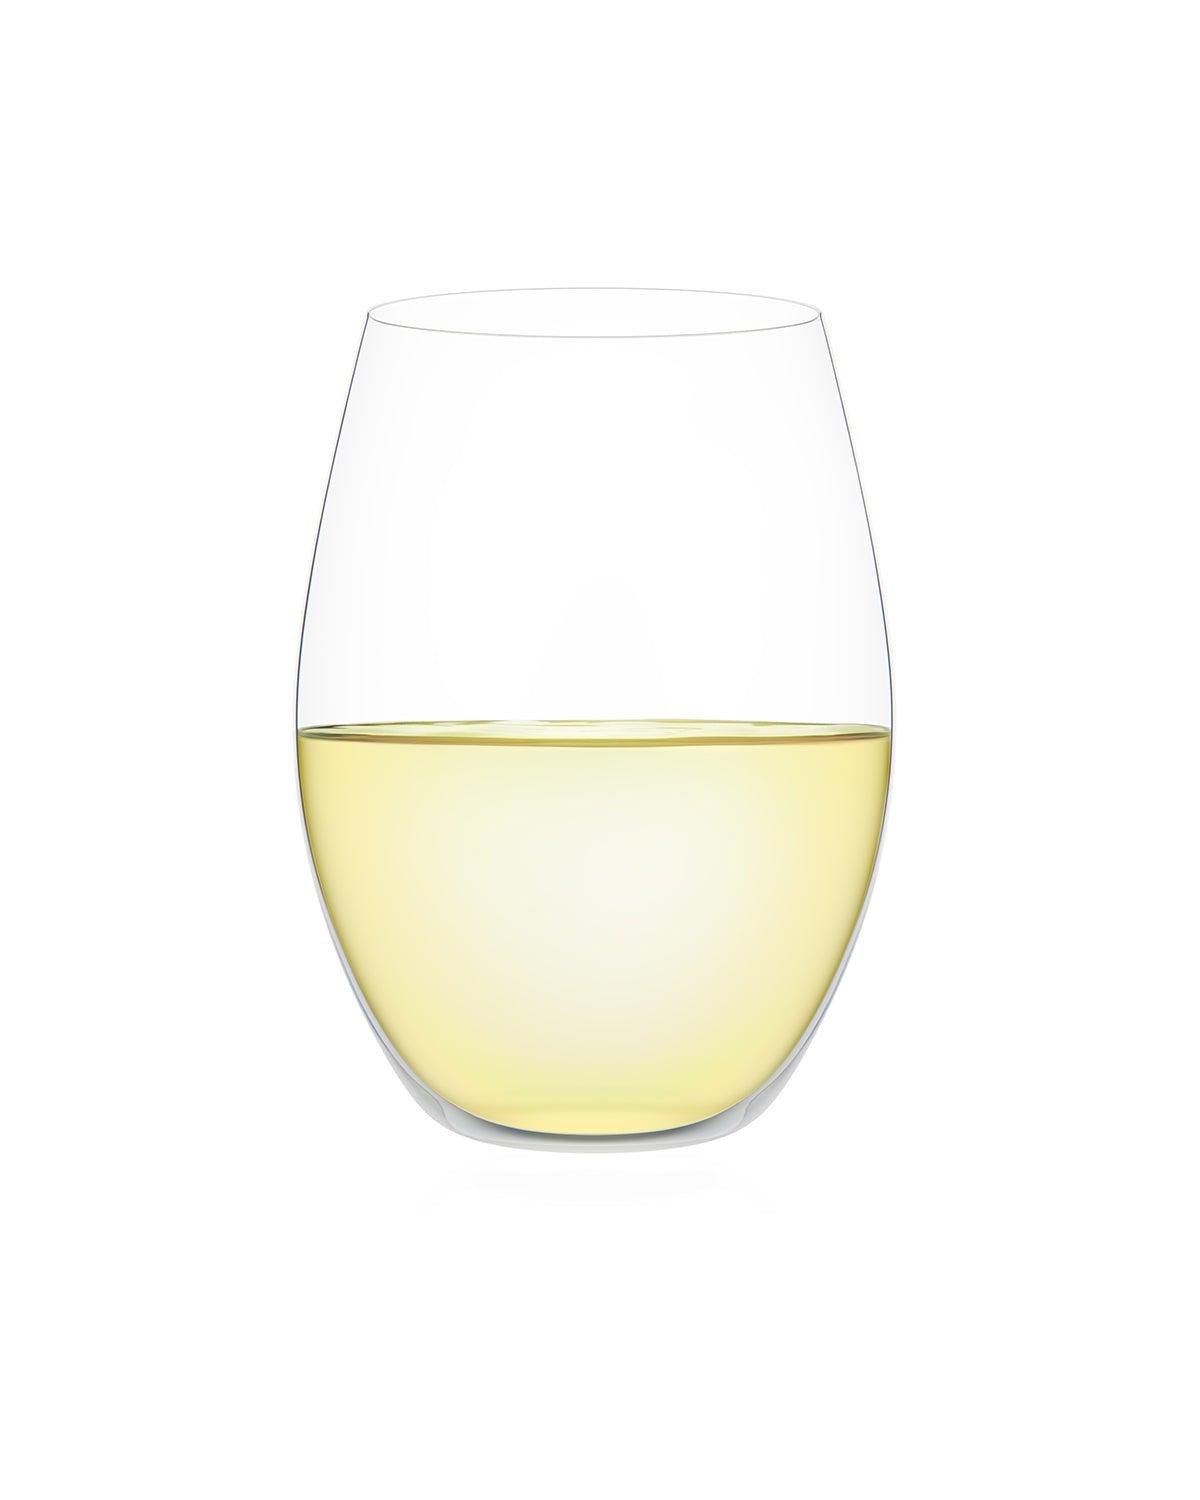 Plumm Outdoors Stemless WHITE+ Unbreakable Polycarbonate Wine Glass Set - 4 Pack